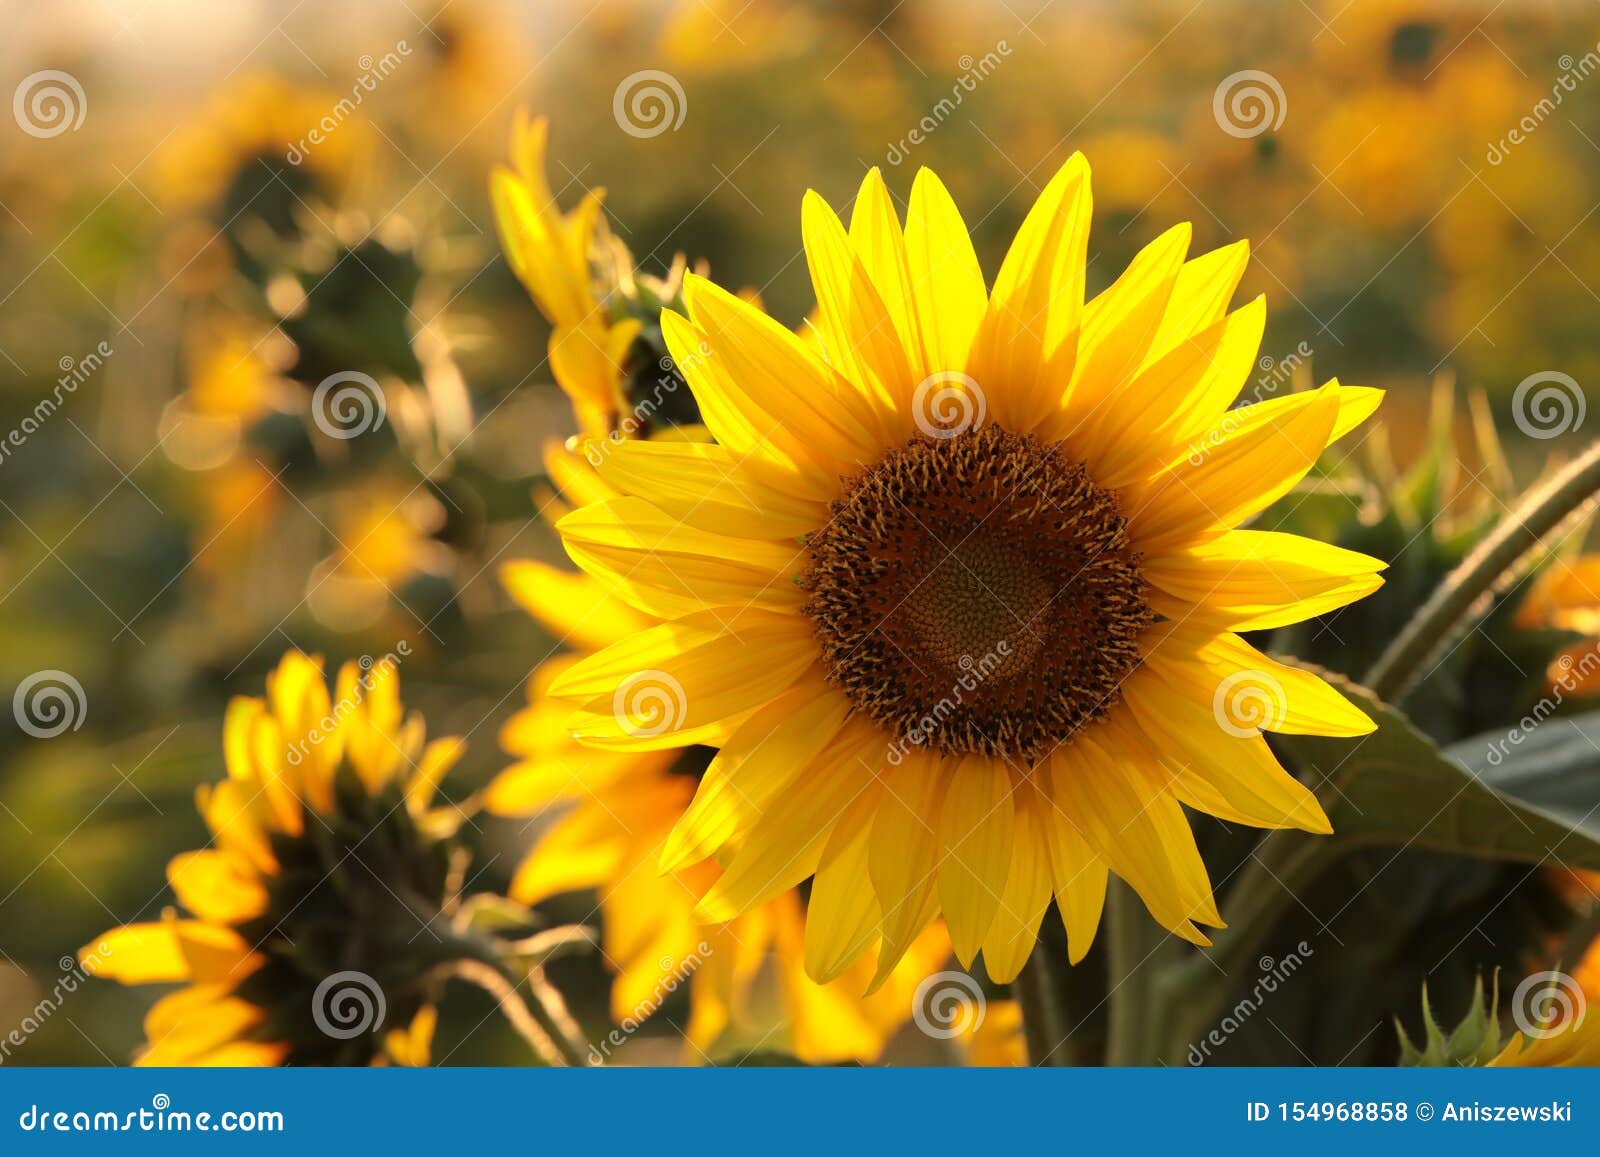 164,740 August Nature Photos - Free Royalty-Free Photos from Dreamstime